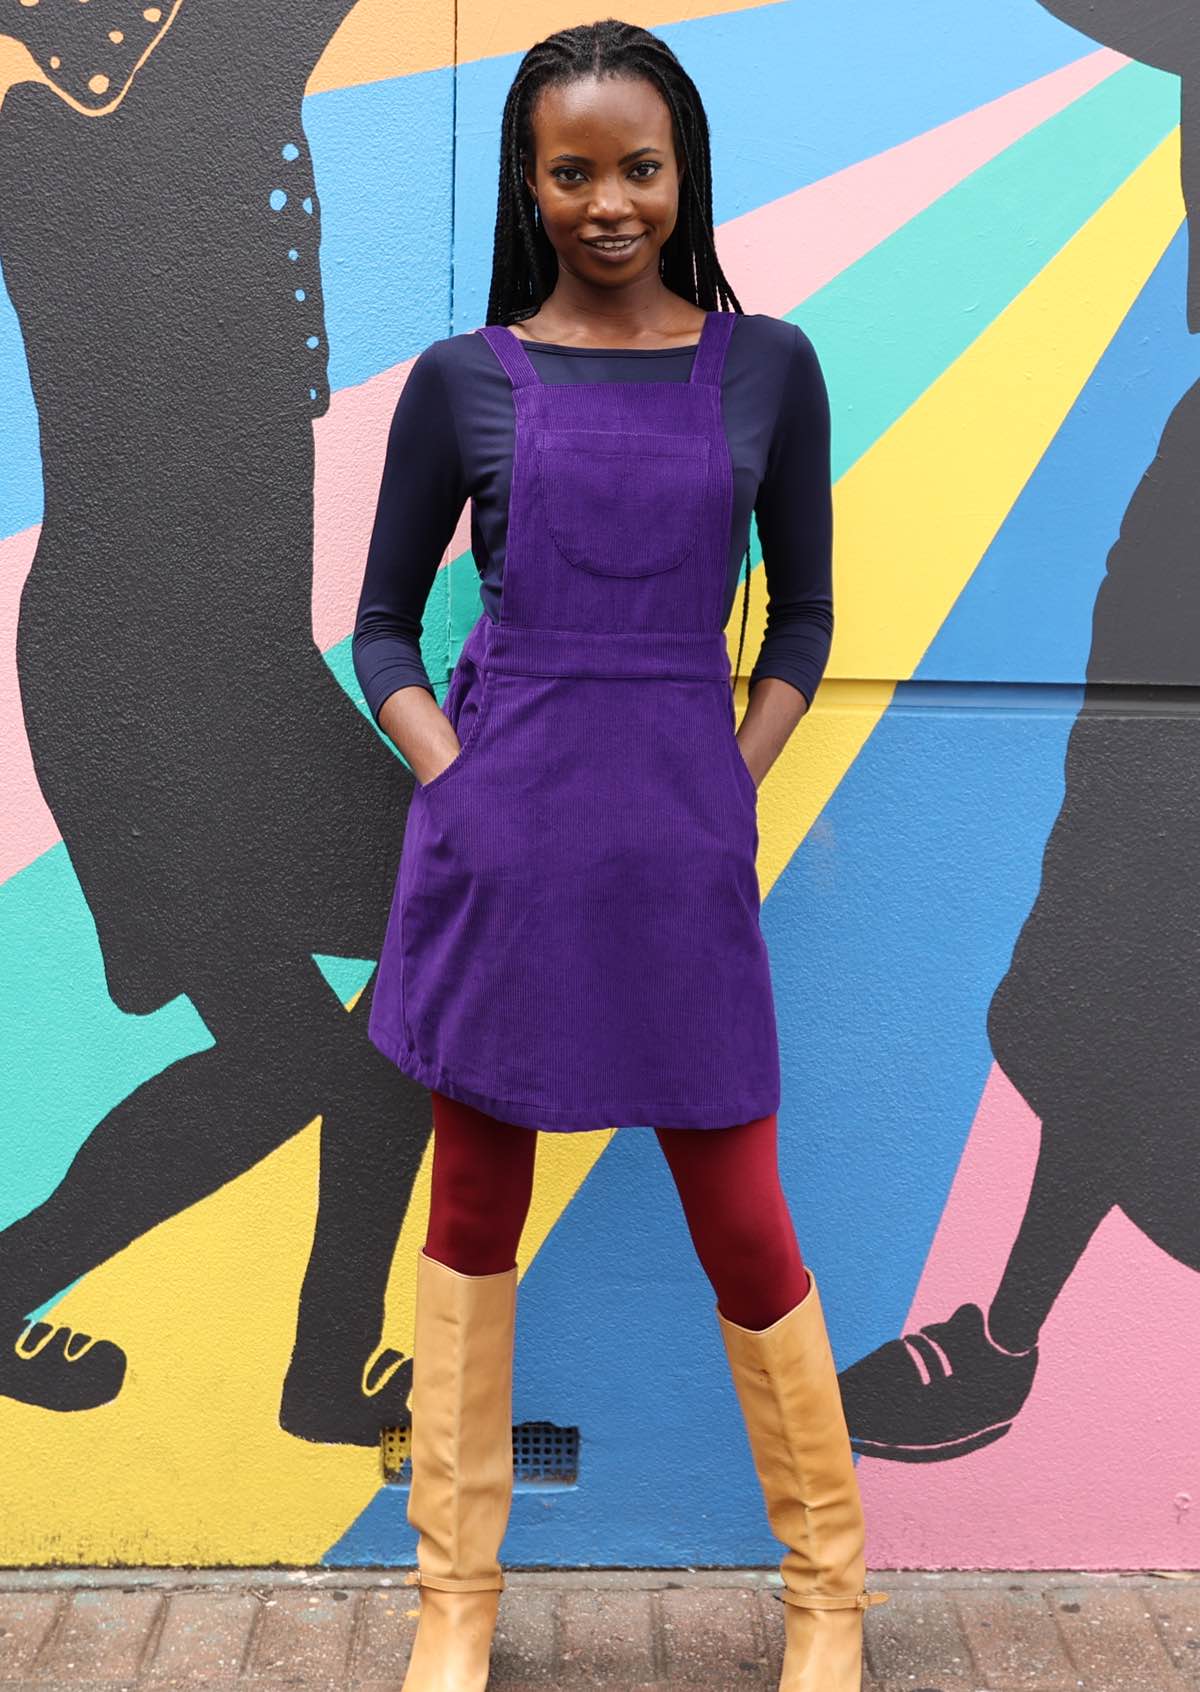 woman wearing purple cotton corduroy pinafore over navy blue top and maroon leggings with hands in pockets